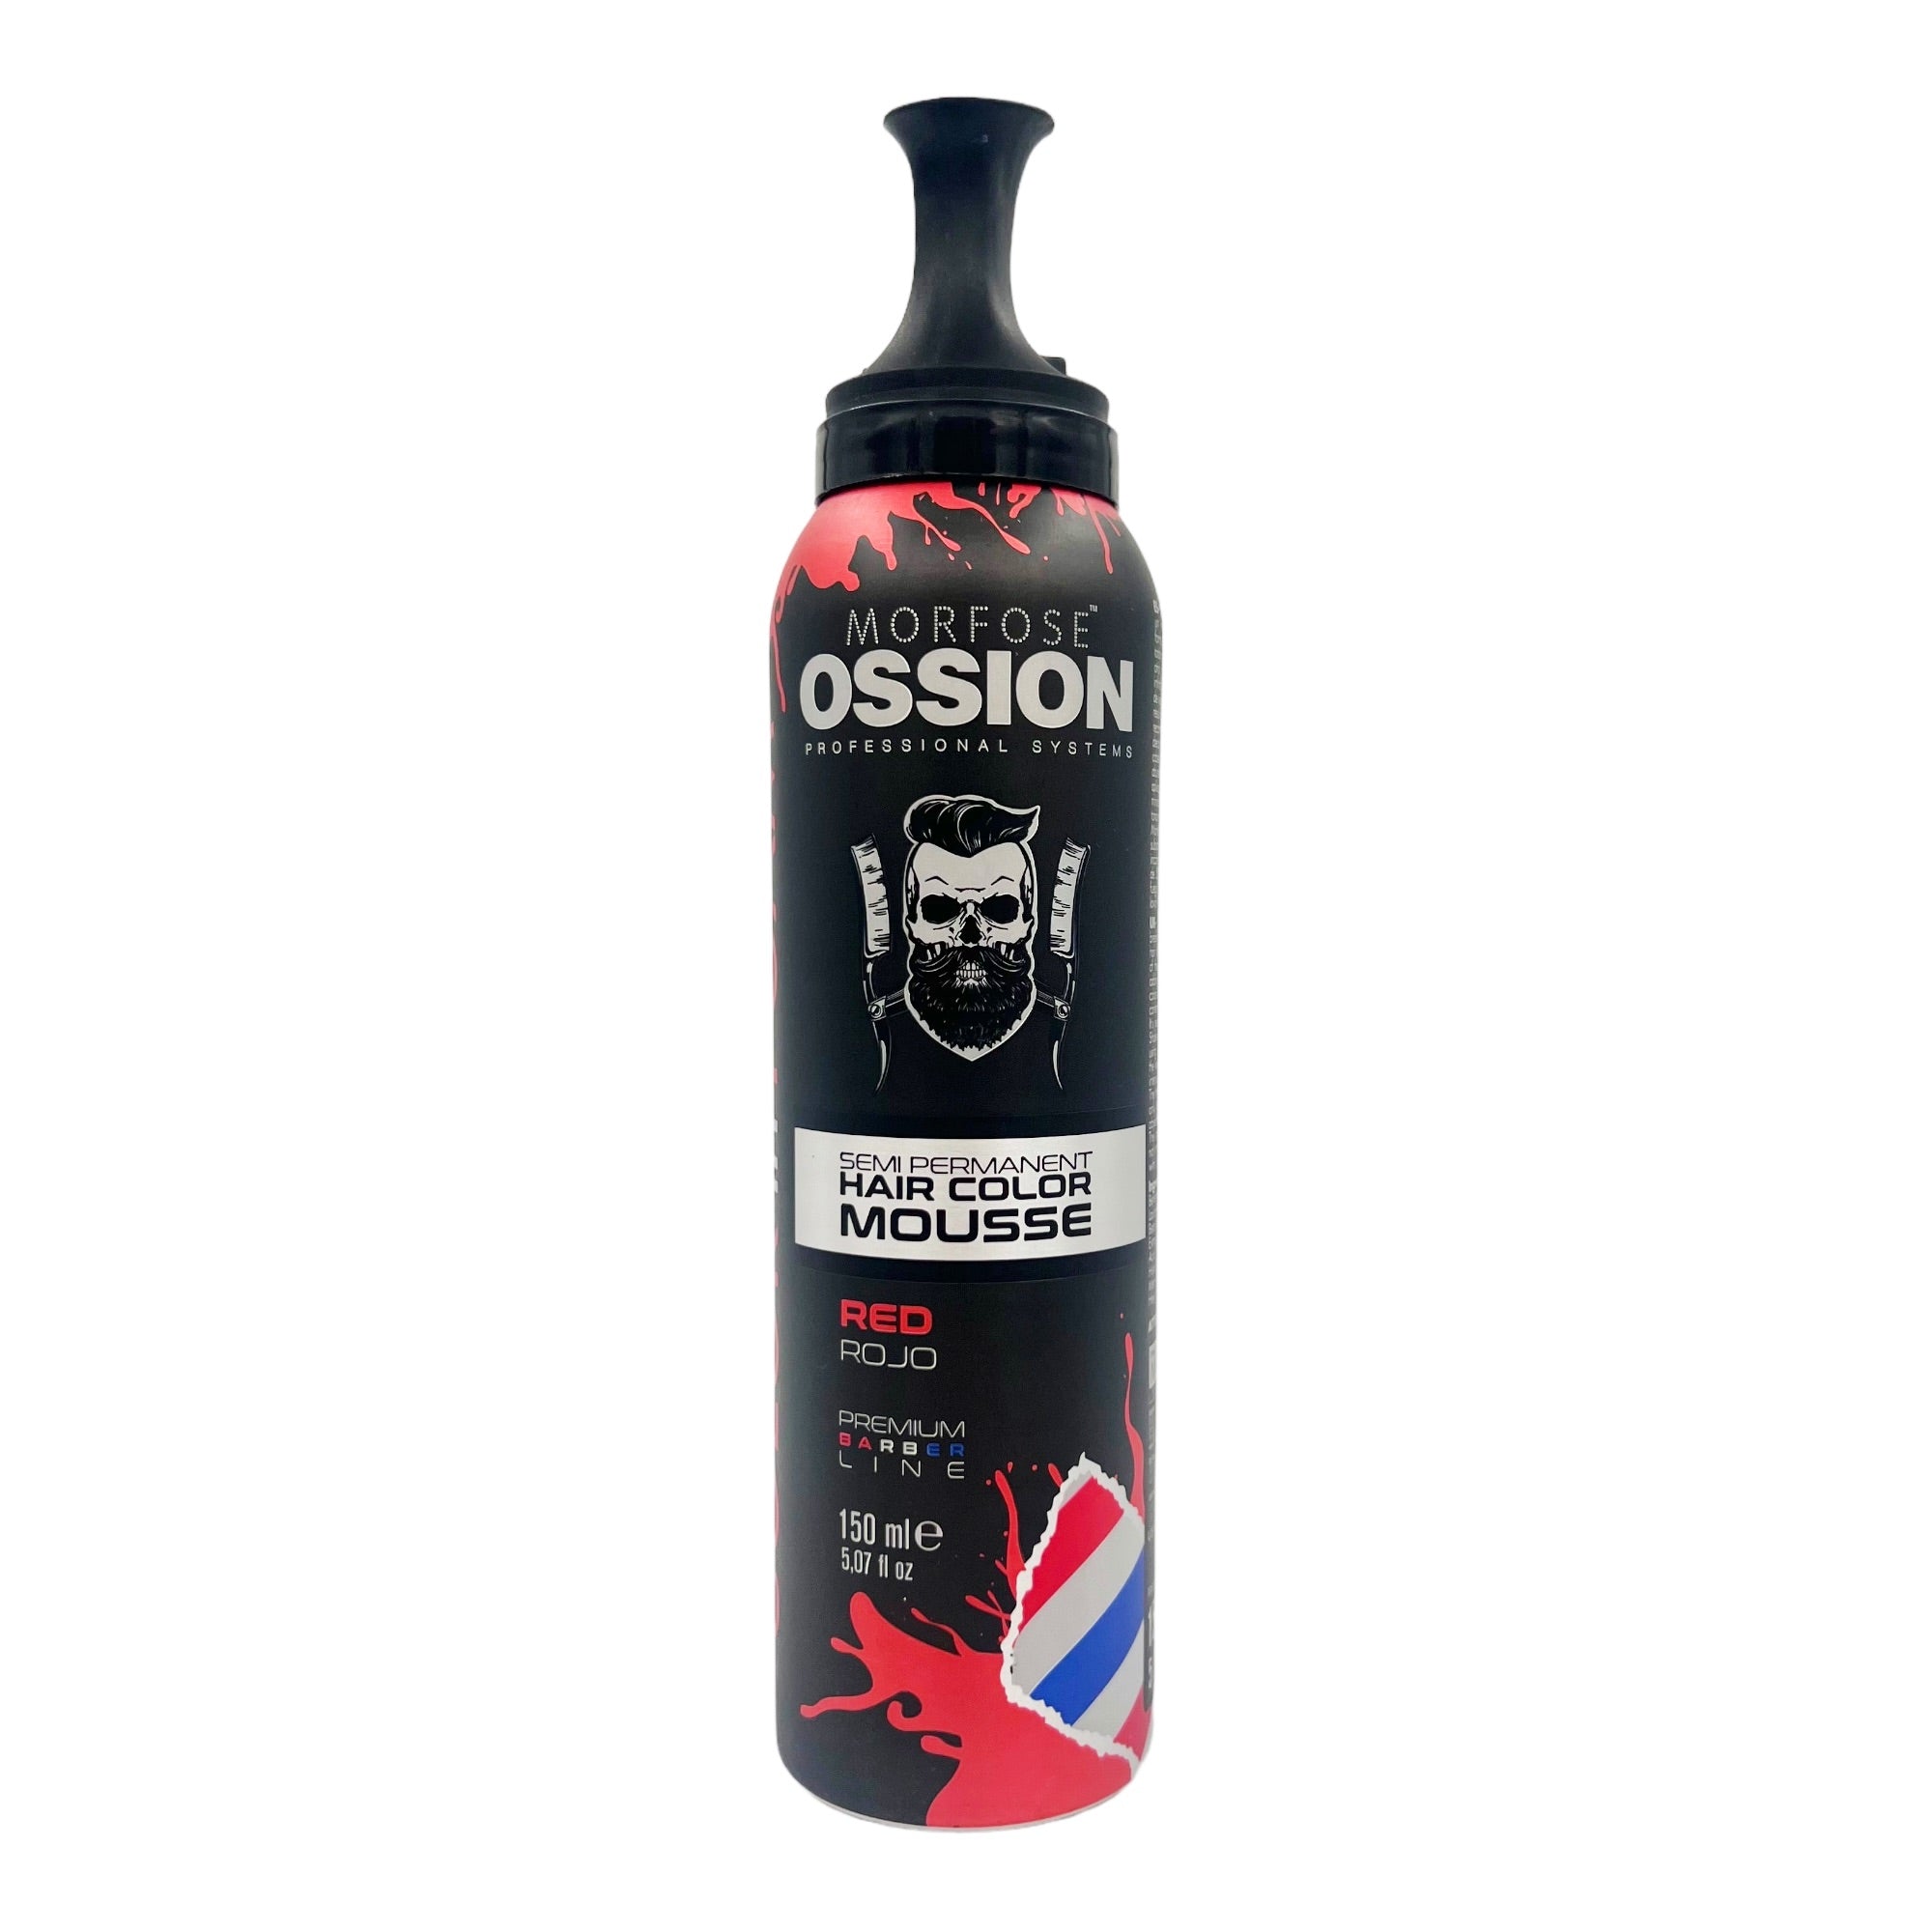 Morfose - Ossion Semi Permanent Hair Colour Mousse Red 150ml